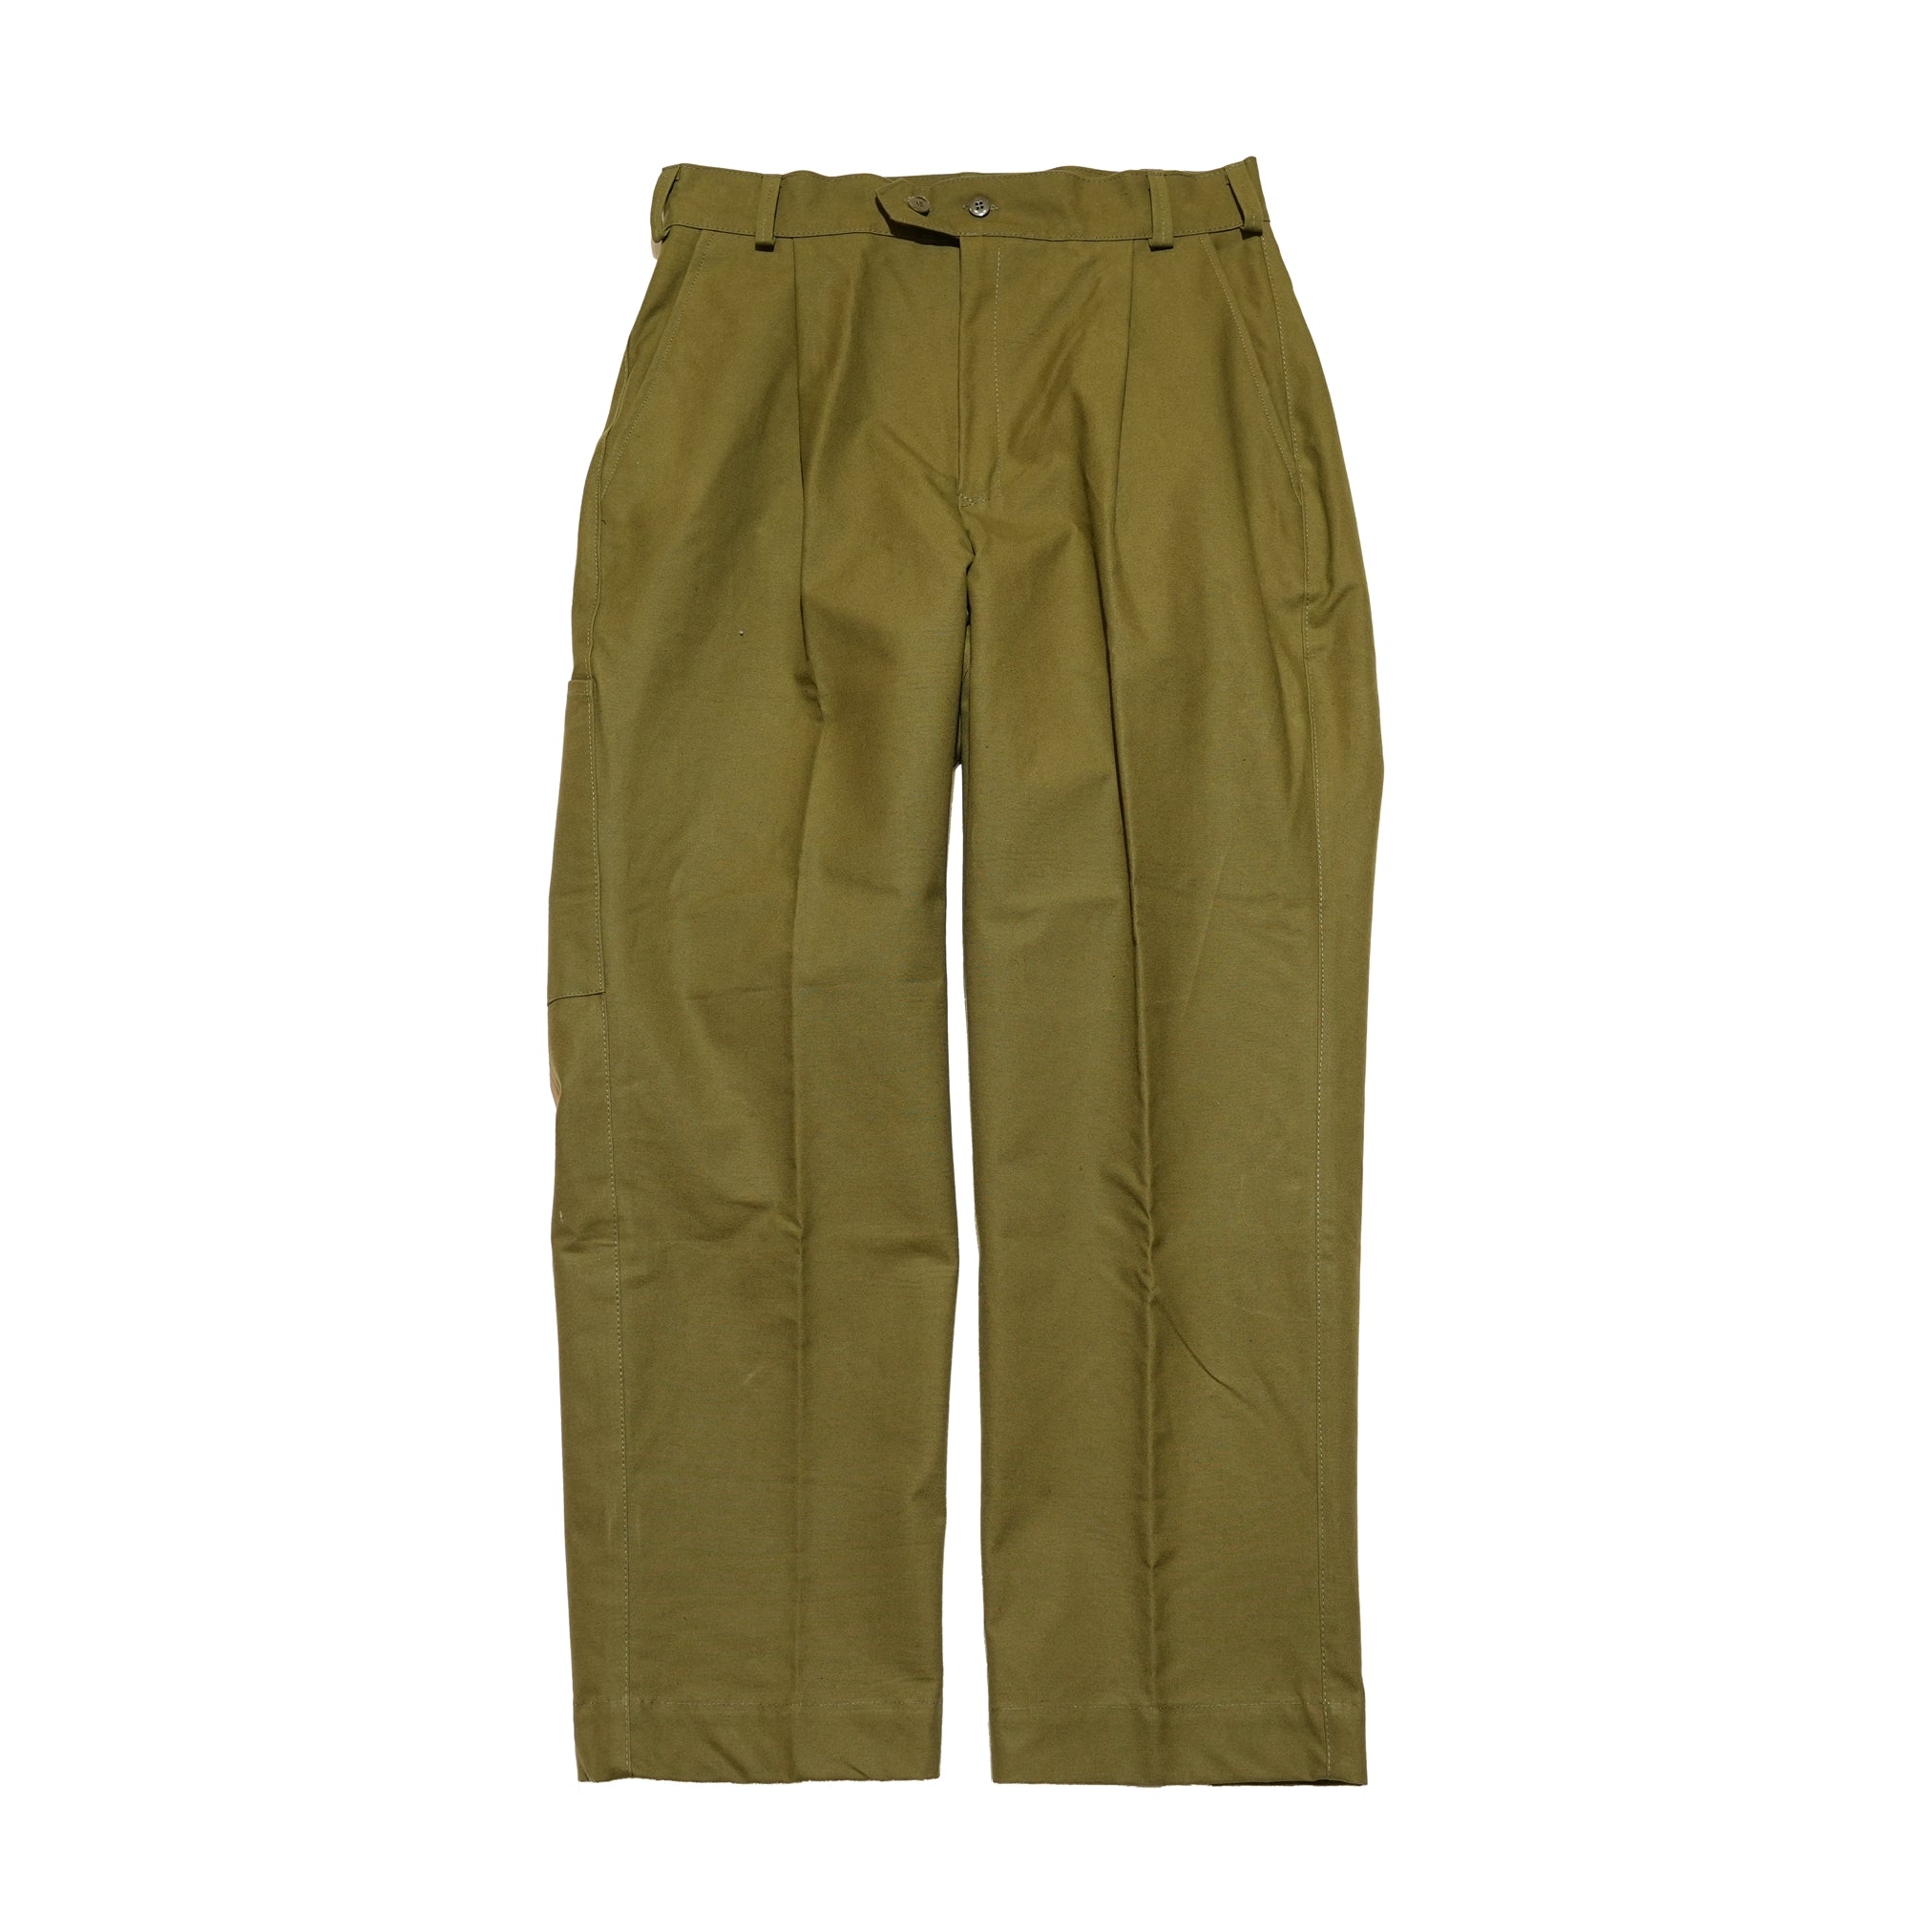 No:ve2024ss01A | Name:PANTALONE LAVORO_Long LIMITED FABRIC | Color:Hungary Military Olive 【VECCHI_ベッチ】